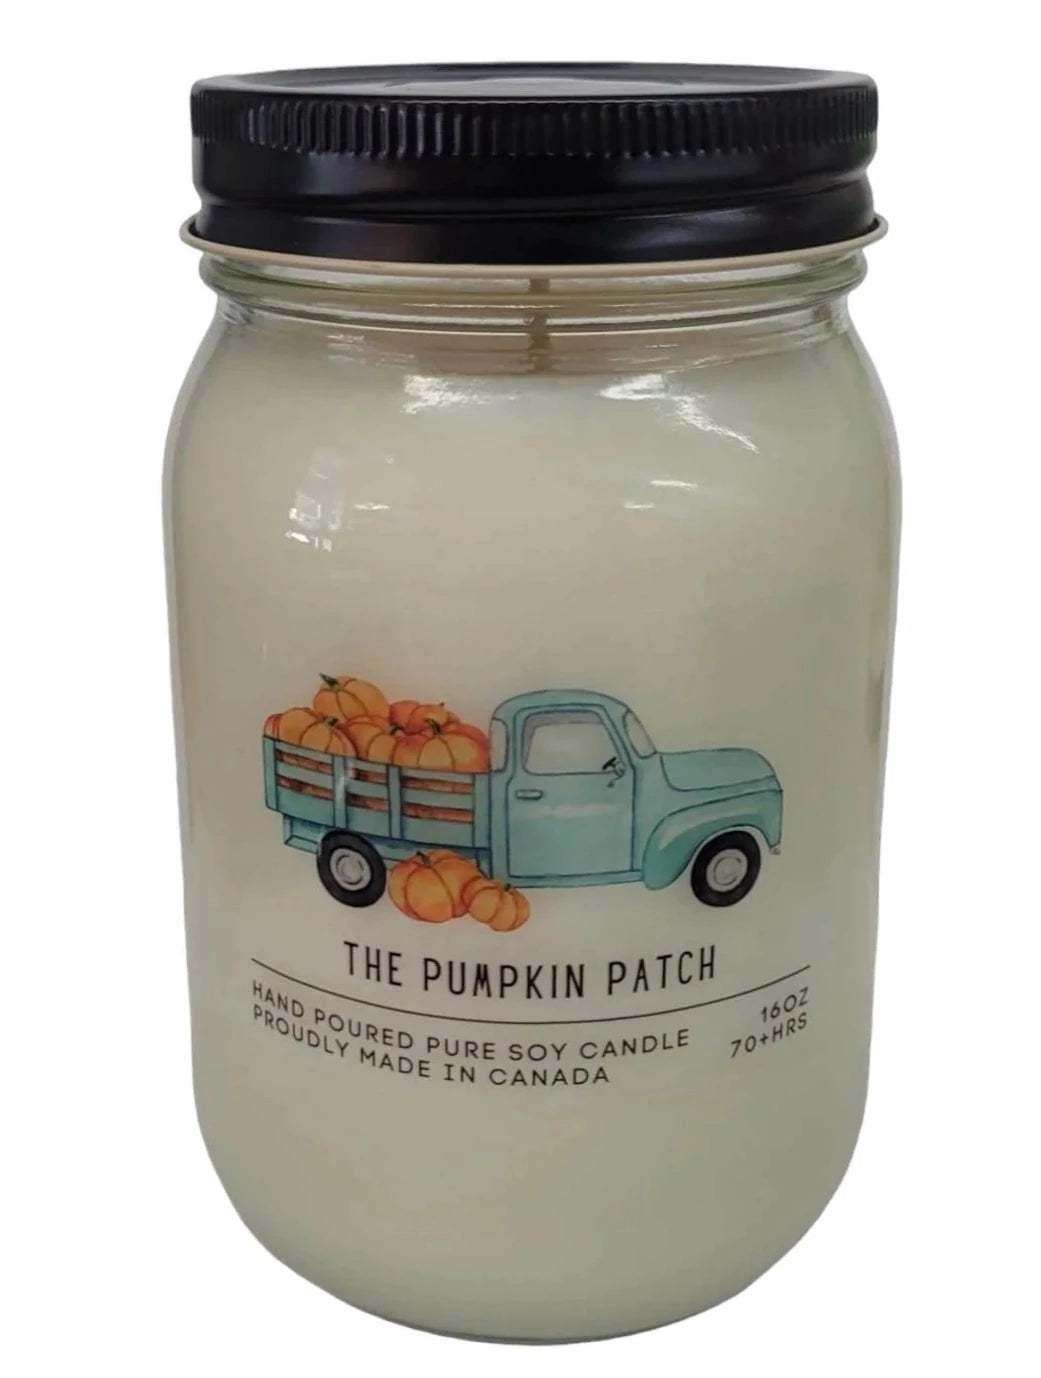 Serendipity Soy Candles- The Pumpkin Patch